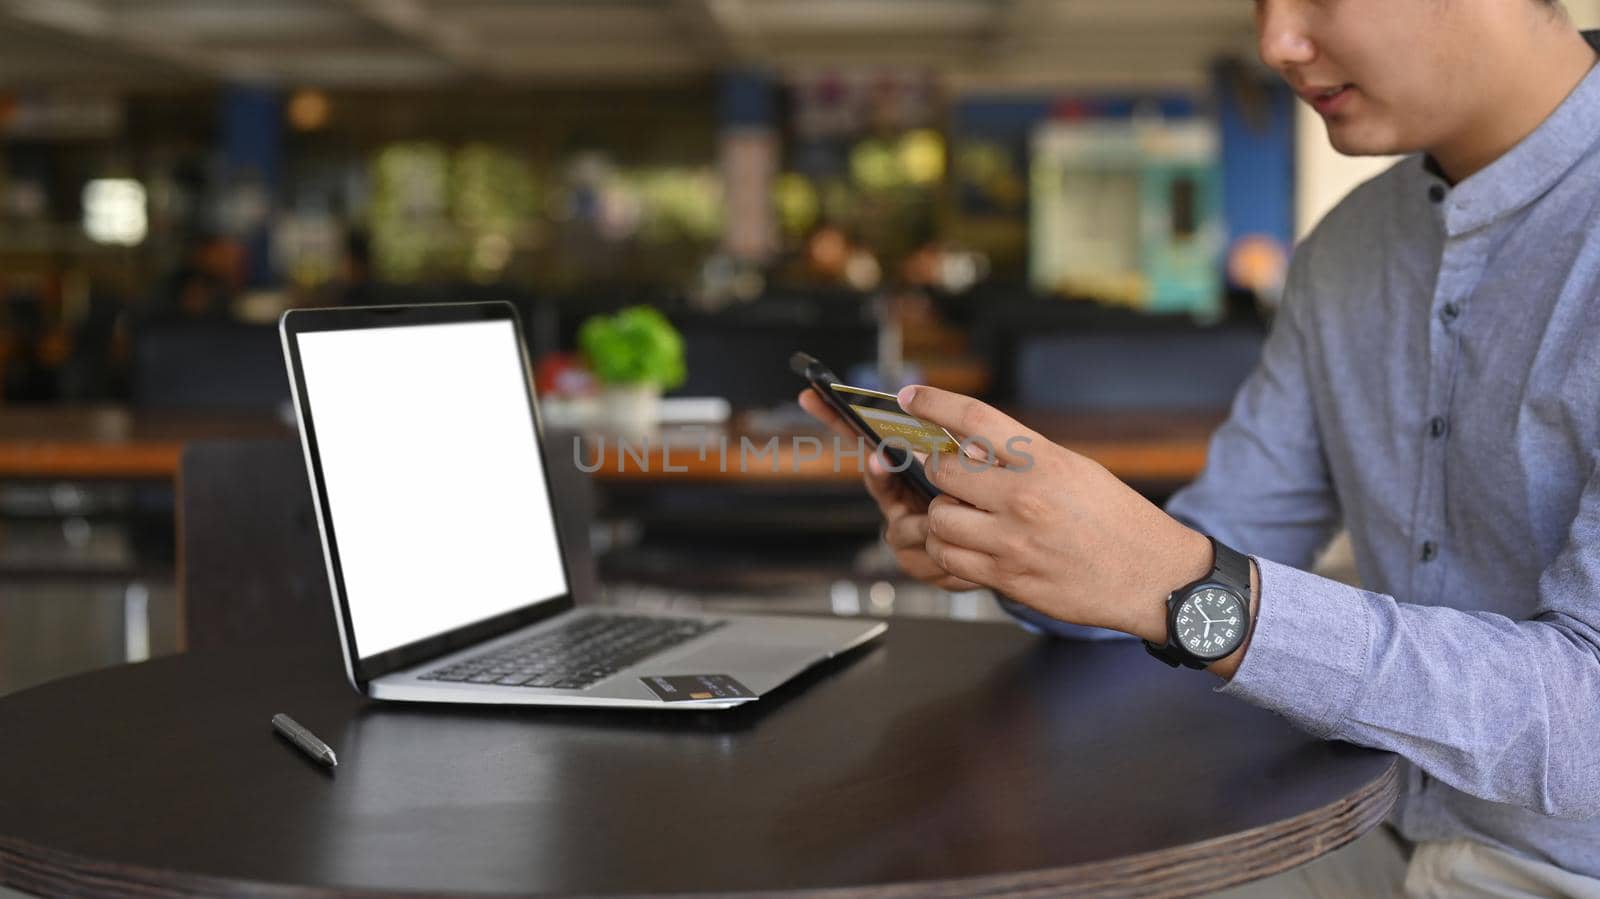 Asian business man sitting in front of laptop and using smart phone.